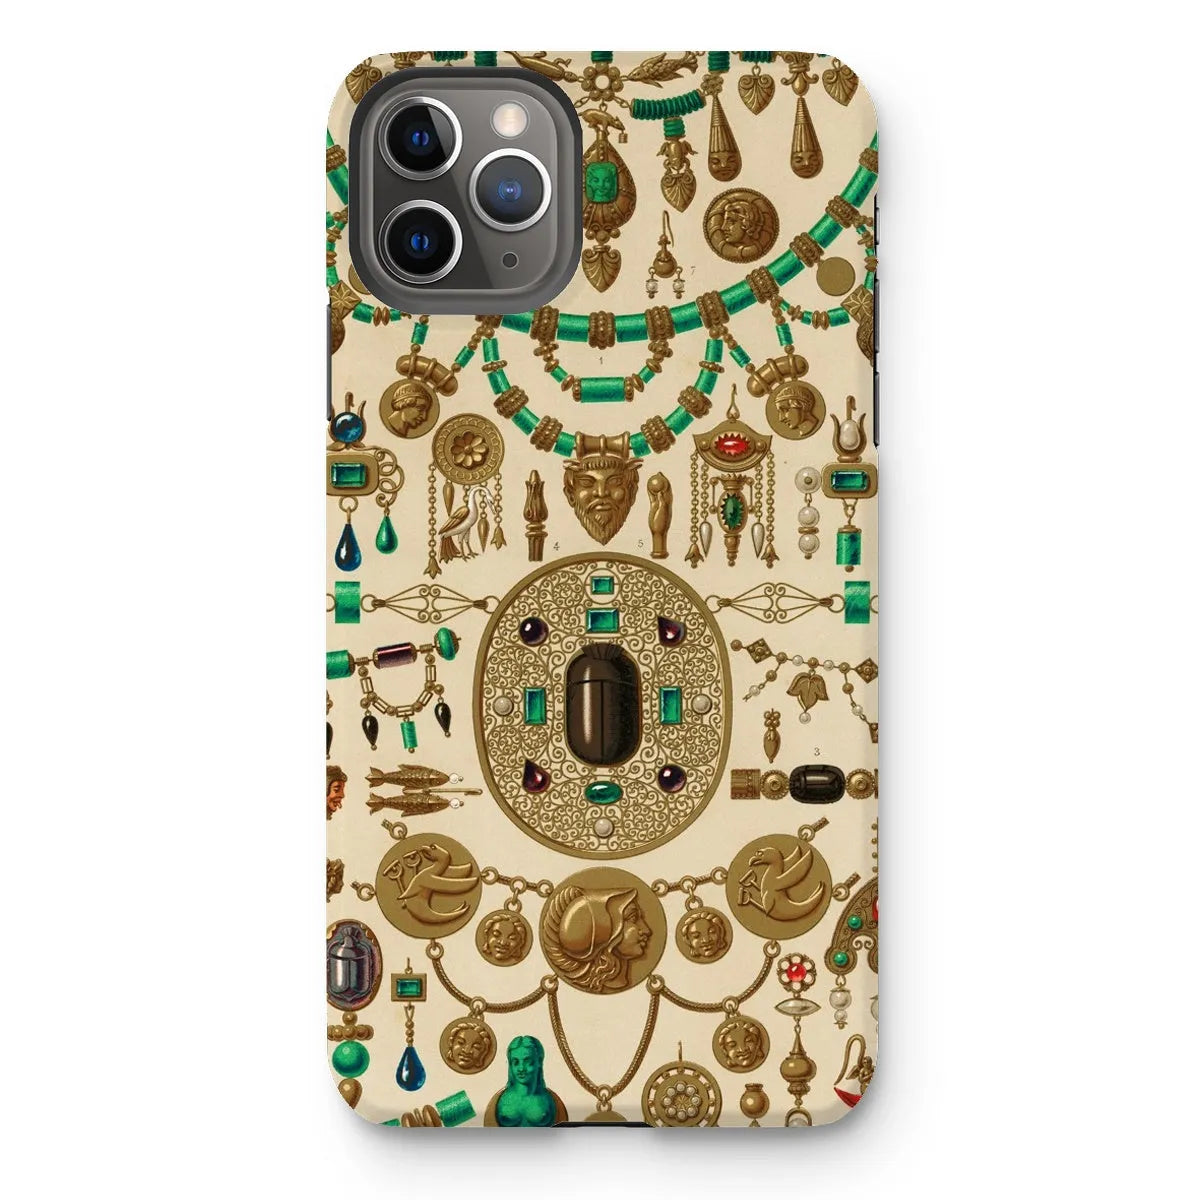 Etruscan Jewelry By Auguste Racinet Art Phone Case - Iphone 11 Pro Max / Matte - Mobile Phone Cases - Aesthetic Art